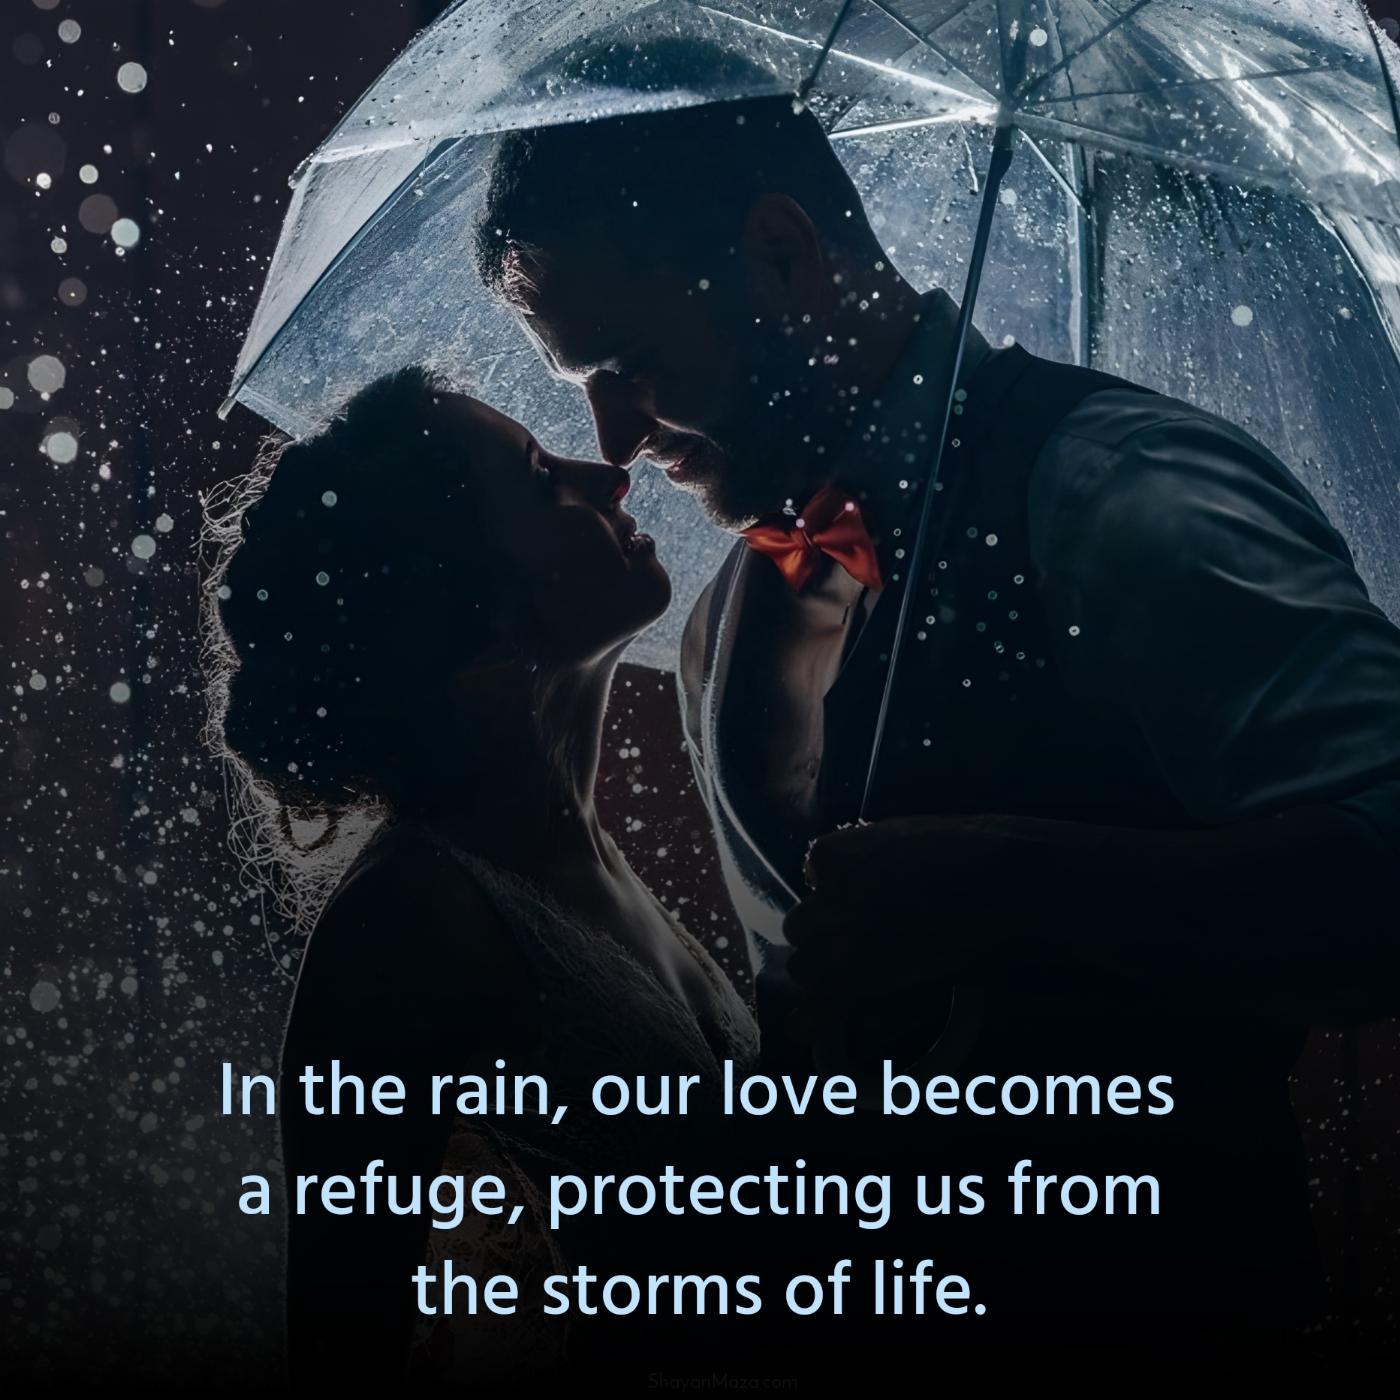 In the rain our love becomes a refuge protecting us